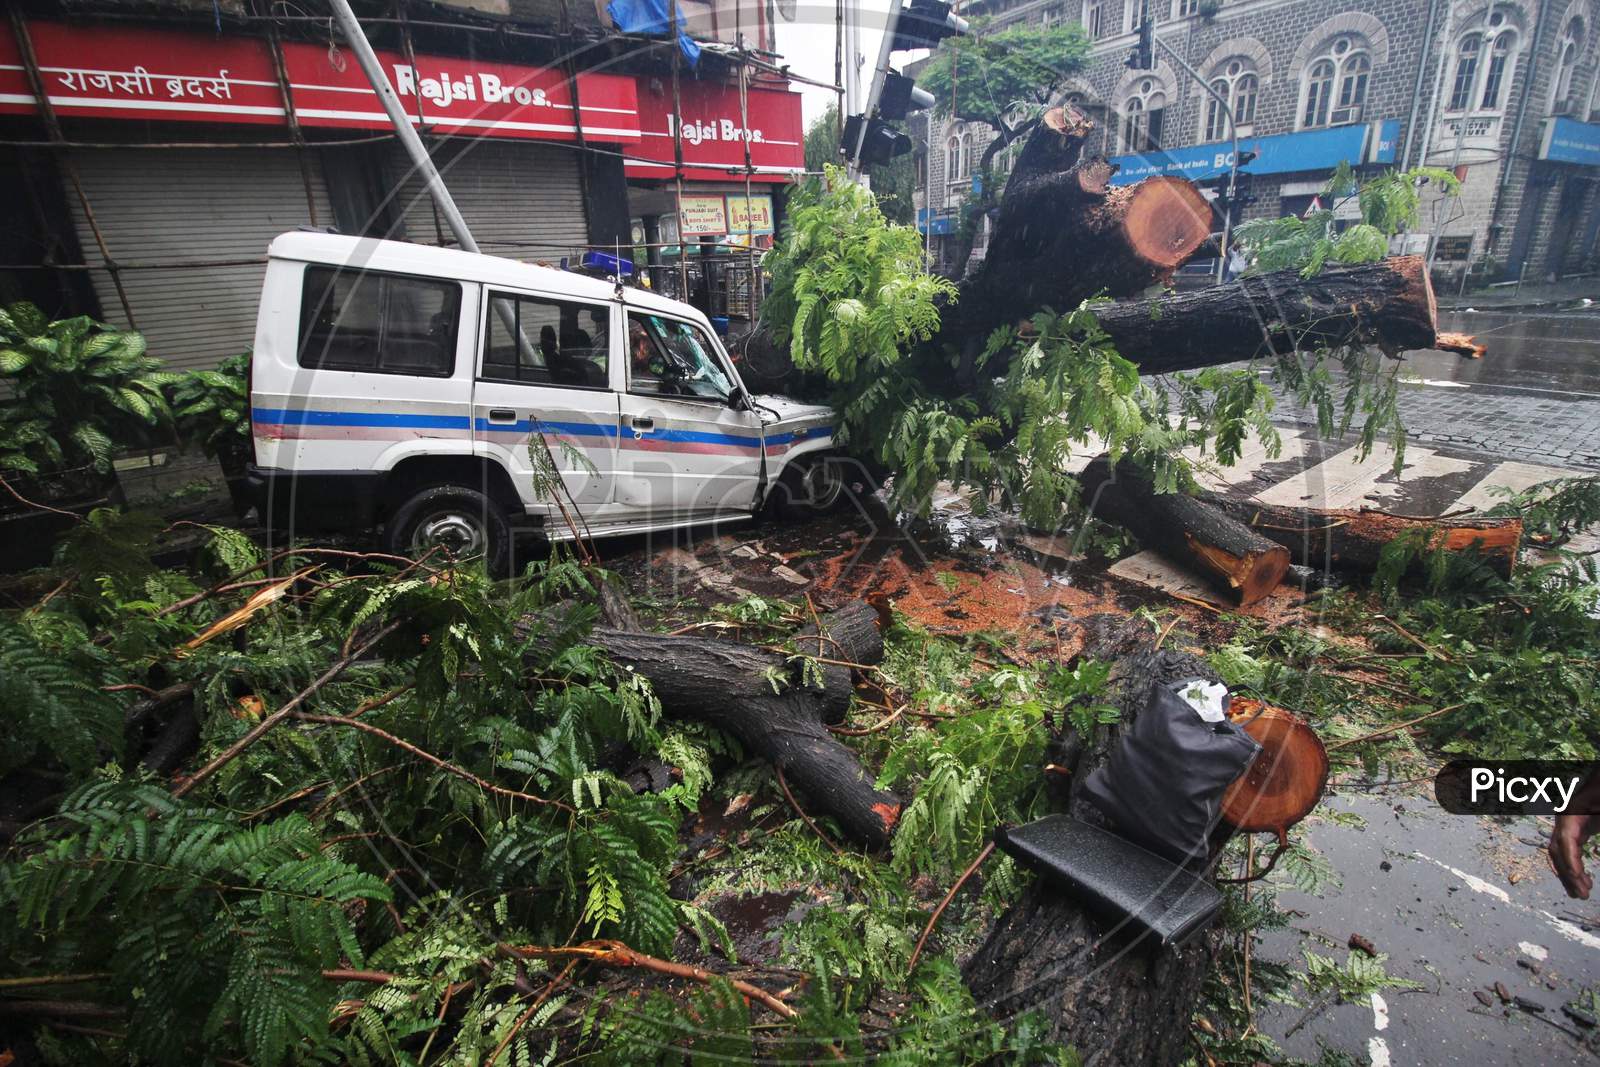 A police vehicle gets damaged after an uprooted tree fell on it after heavy rainfall in Mumbai, India on August 6, 2020.